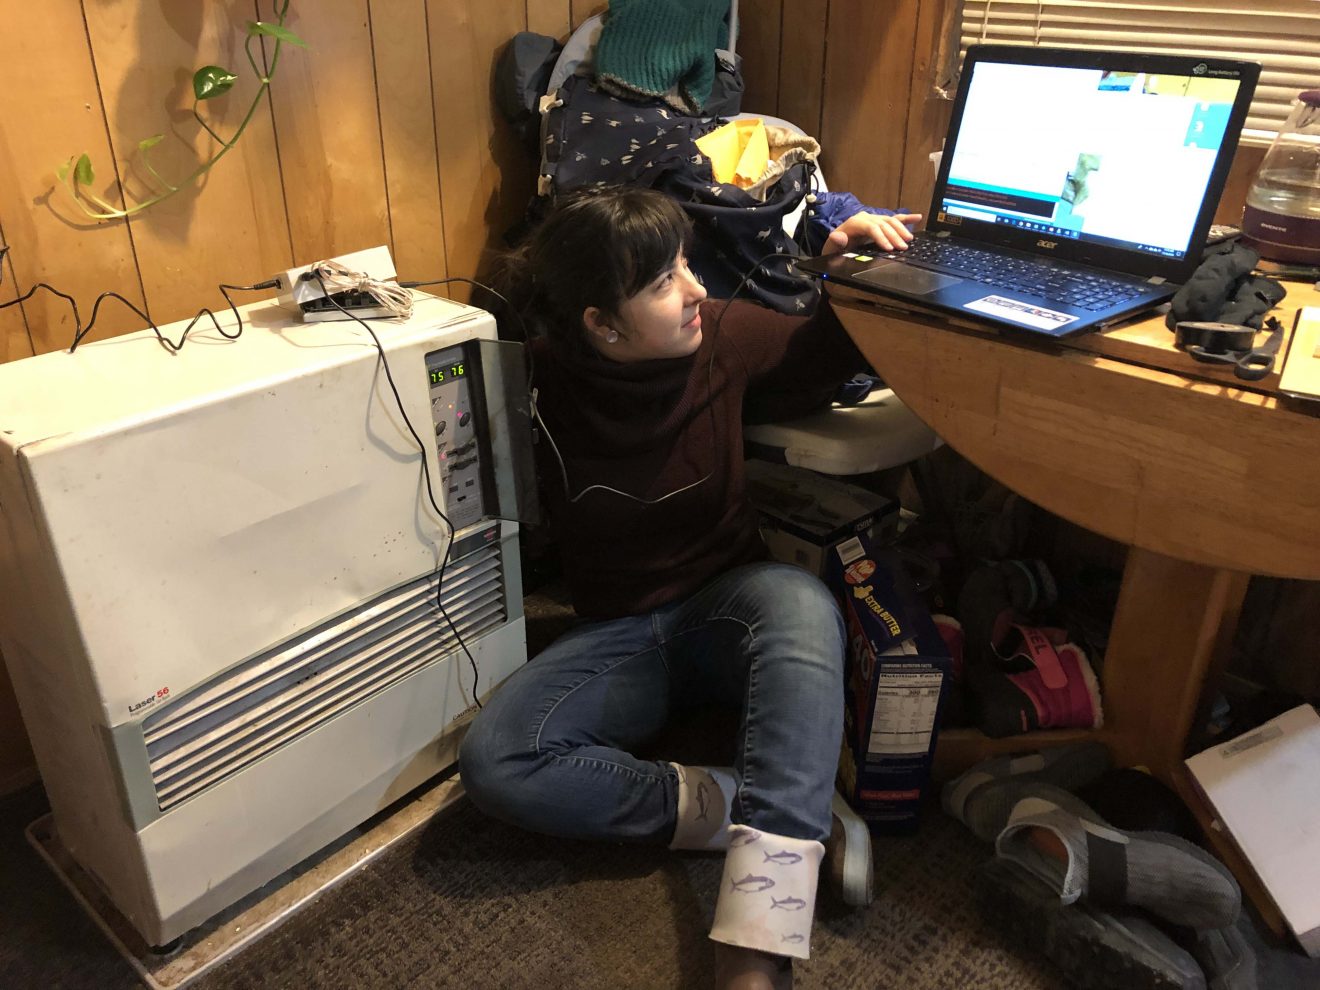 A woman sits on the floor between a heating unit and a desk. She is looking at a laptop on the desk.